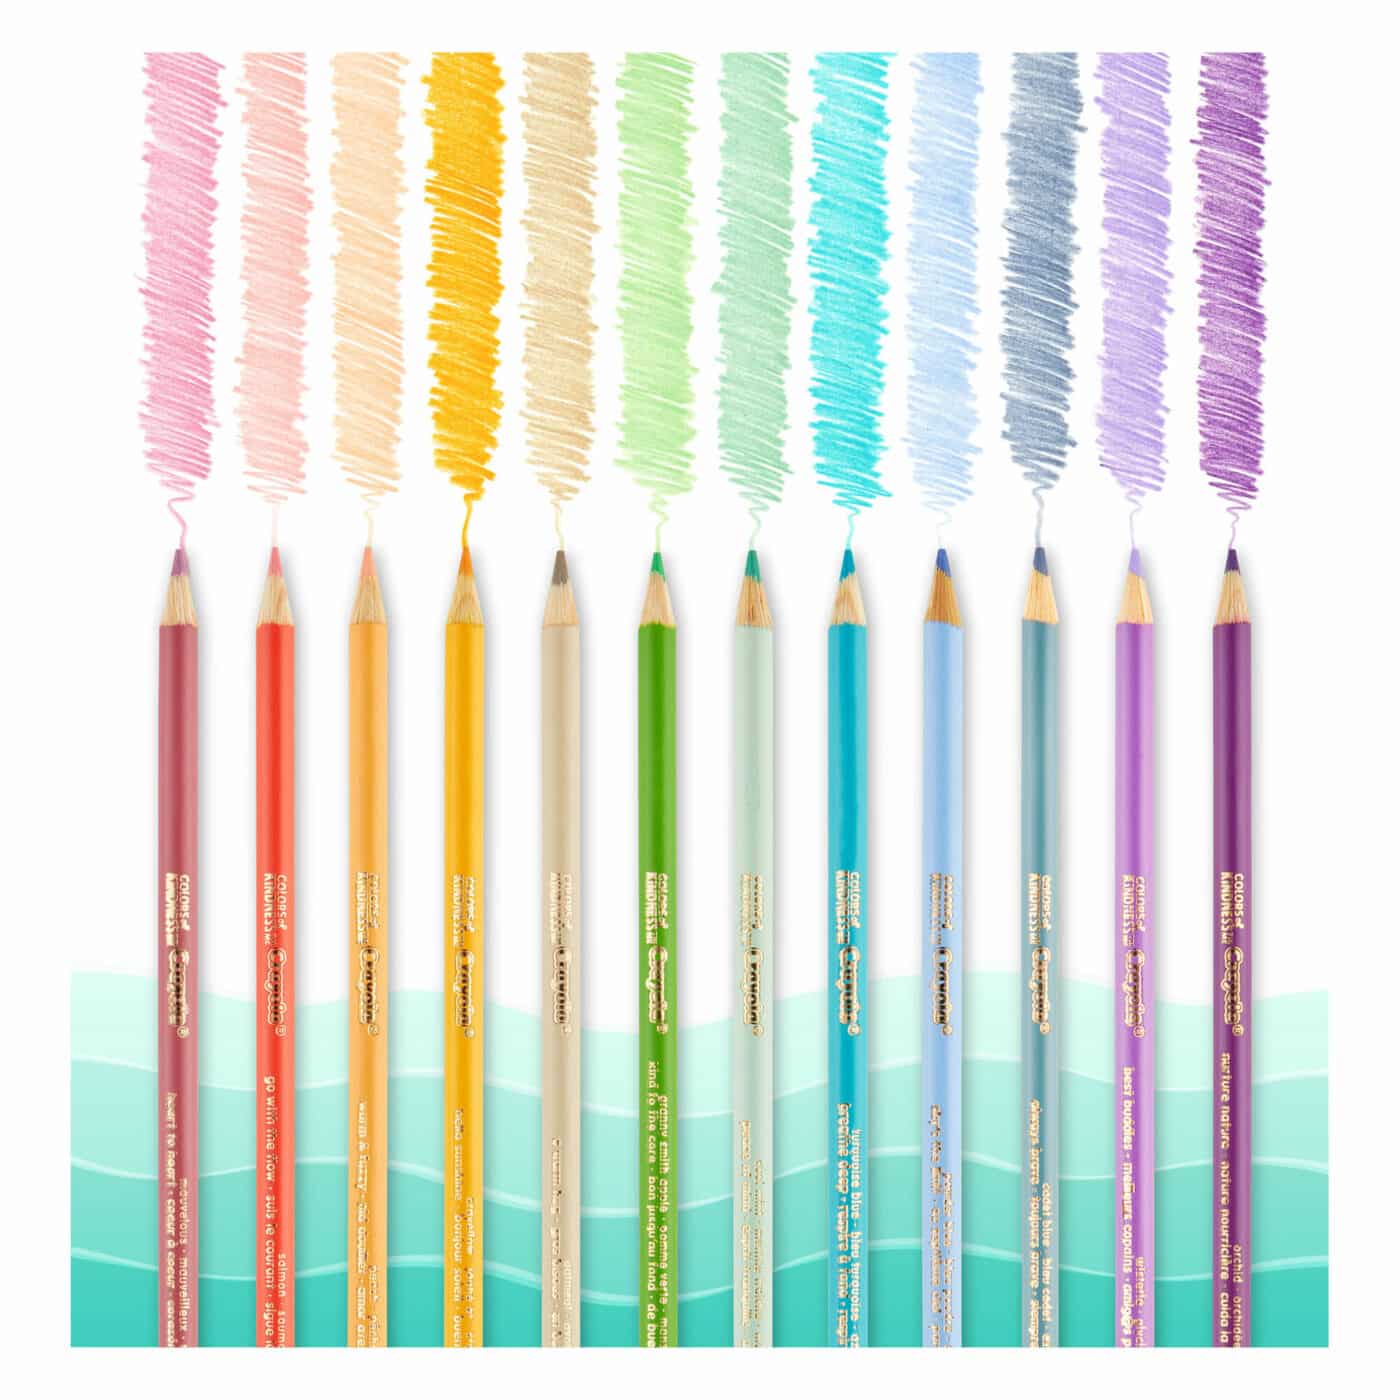 Crayola Colours of Kindness Coloured Pencils - 12 Pack